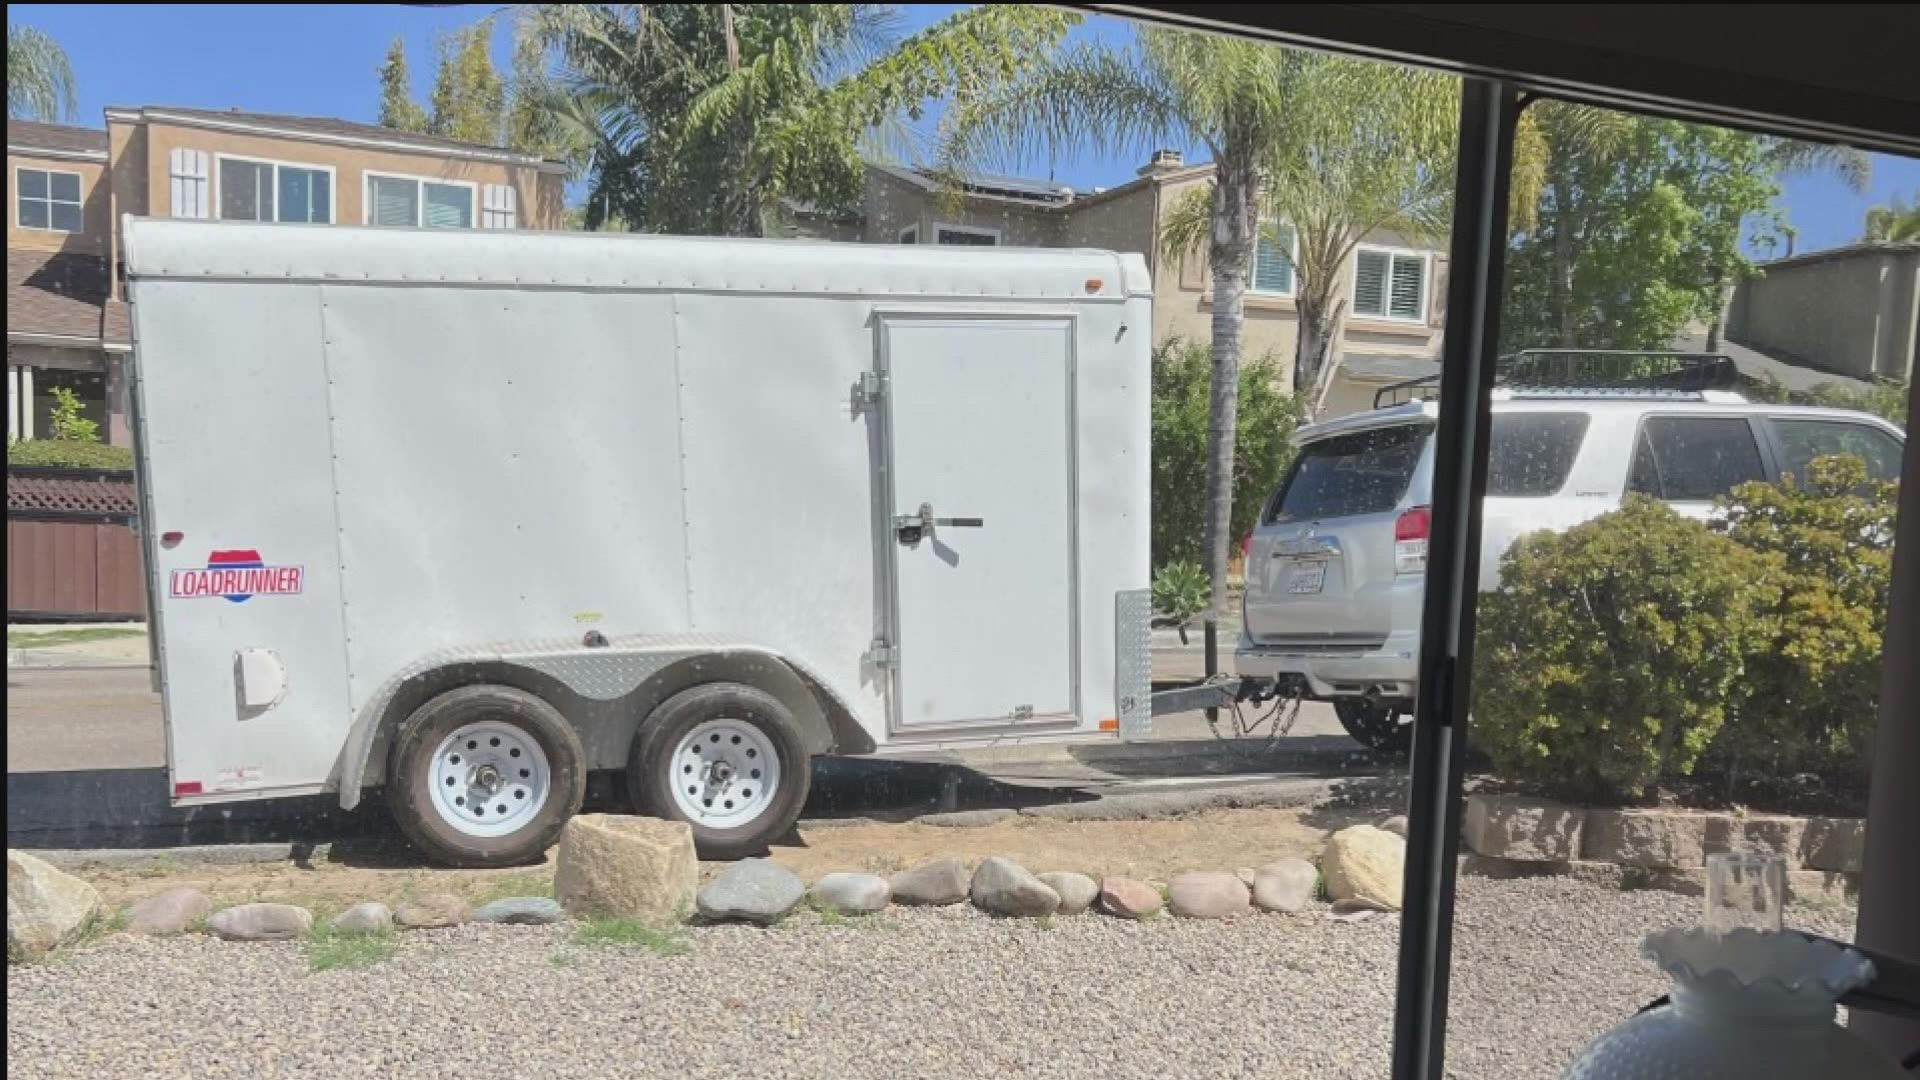 An Encinitas woman's trailer was stolen, it was her livelihood and business.